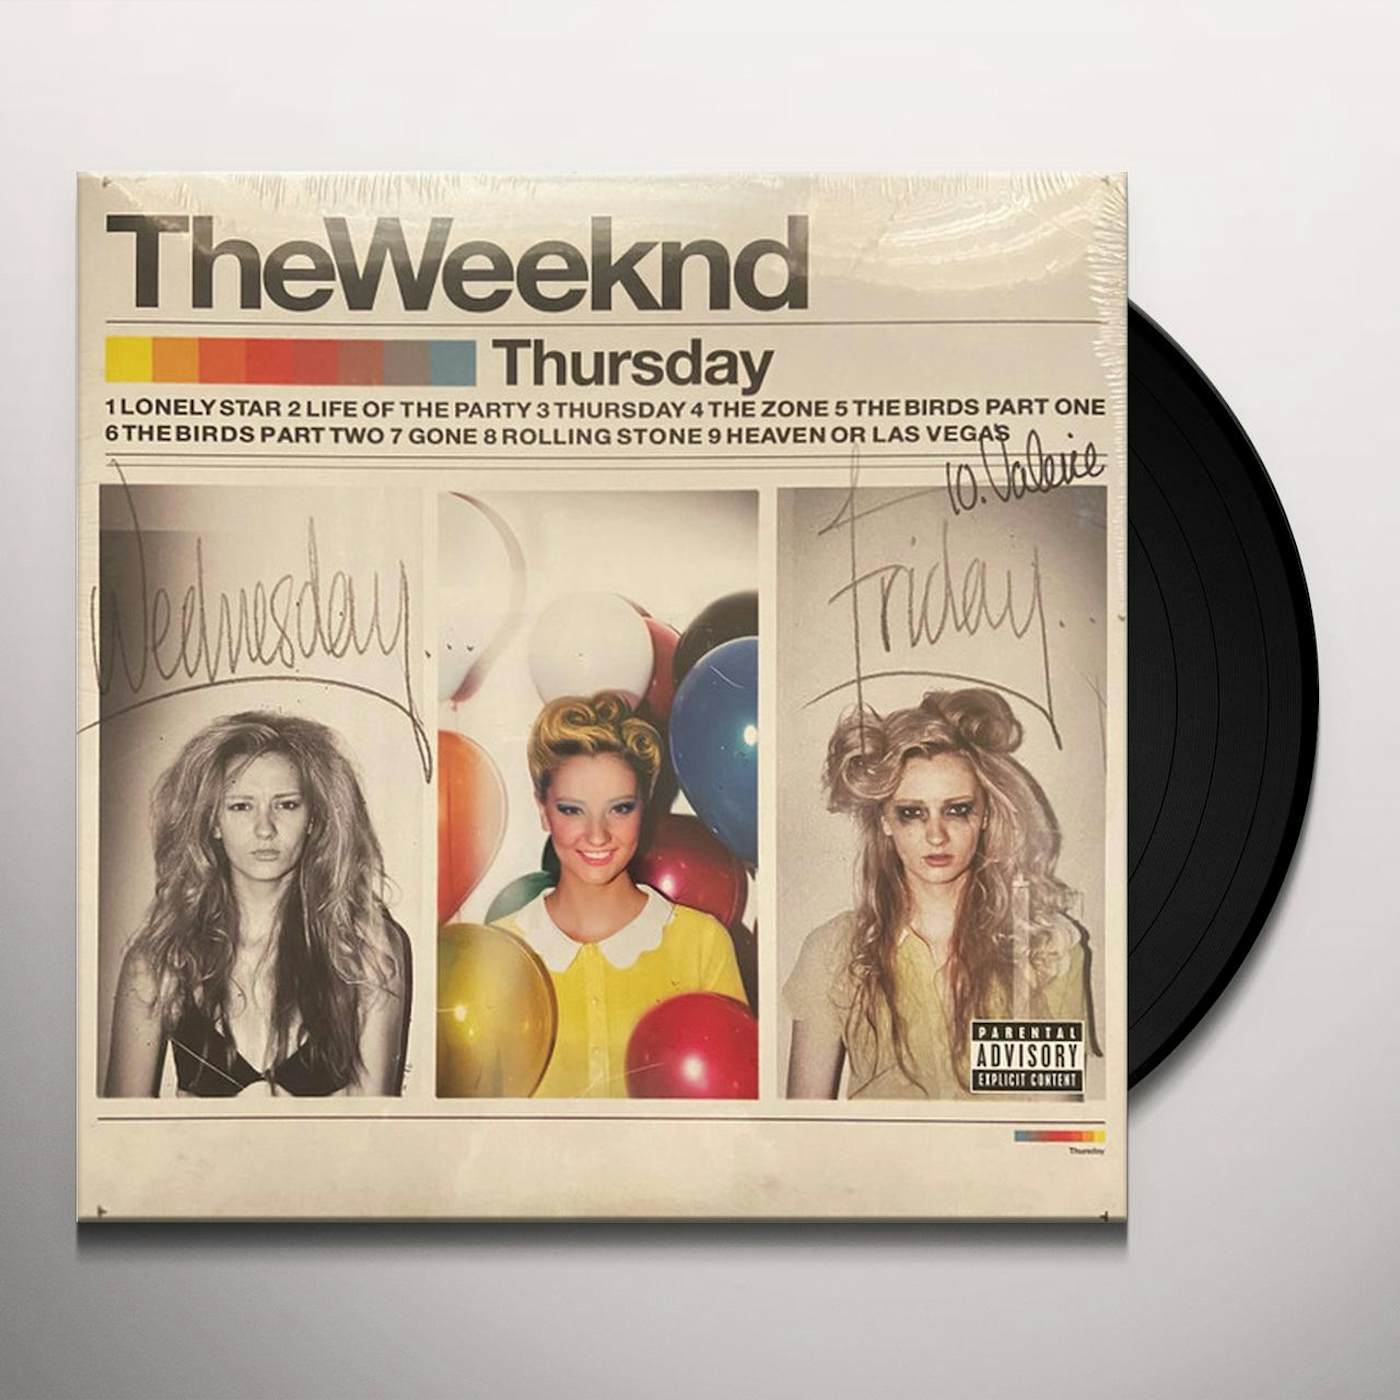 Dawn Fm by The Weeknd (Vinyl, 2022, XO Records) for sale online